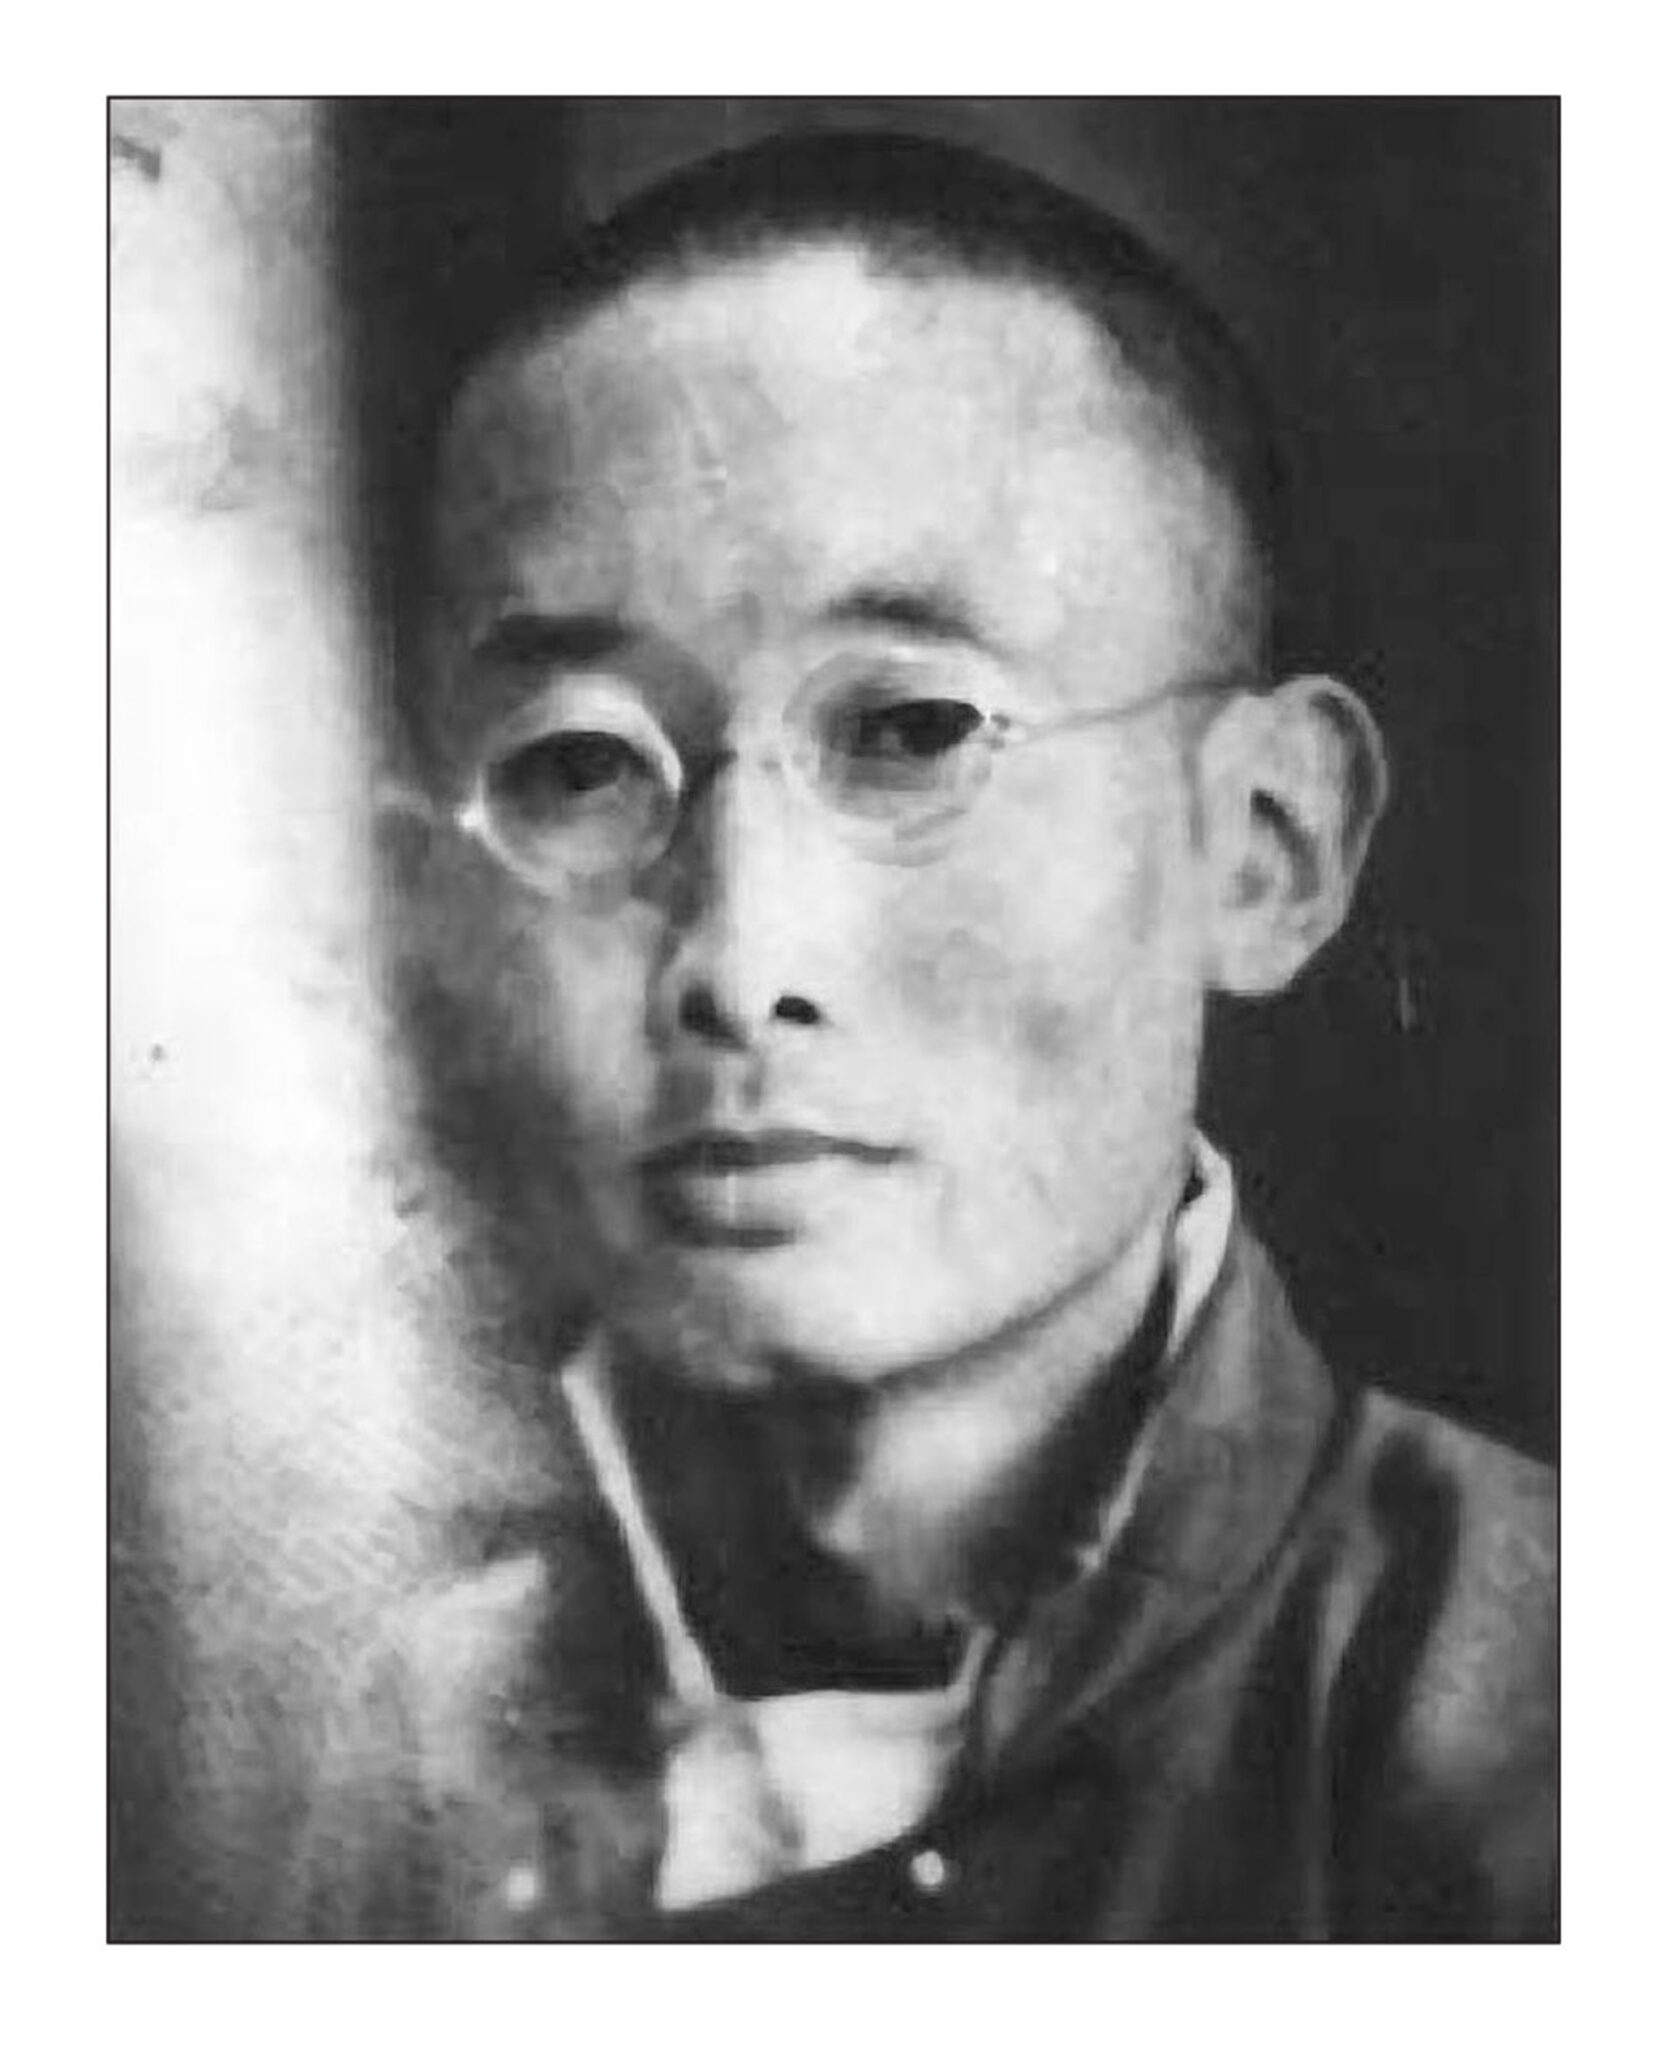 Black and white portrait photograph of man wearing wire frame glasses and jacket with high collar